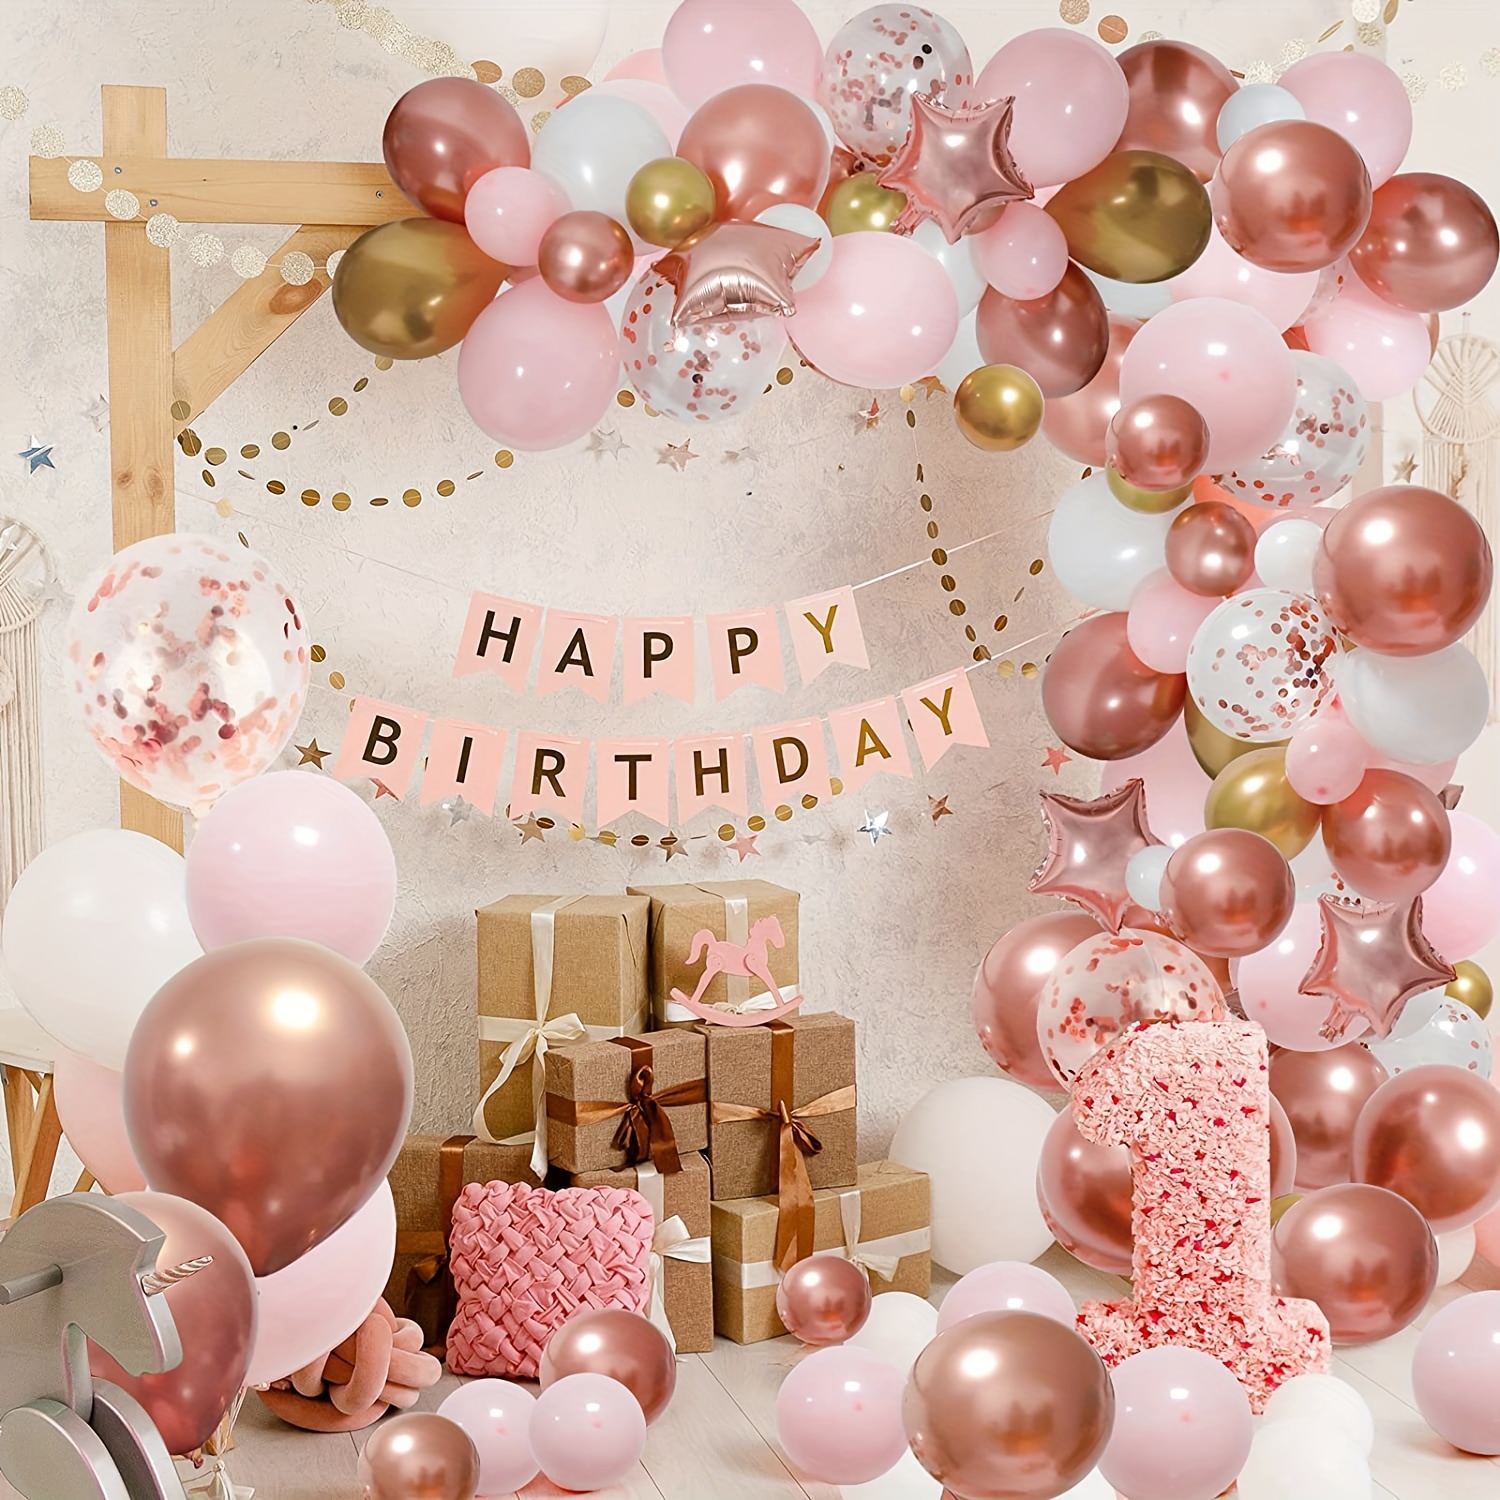 Rose Gold and Pink Birthday Party Decorations Set with Happy